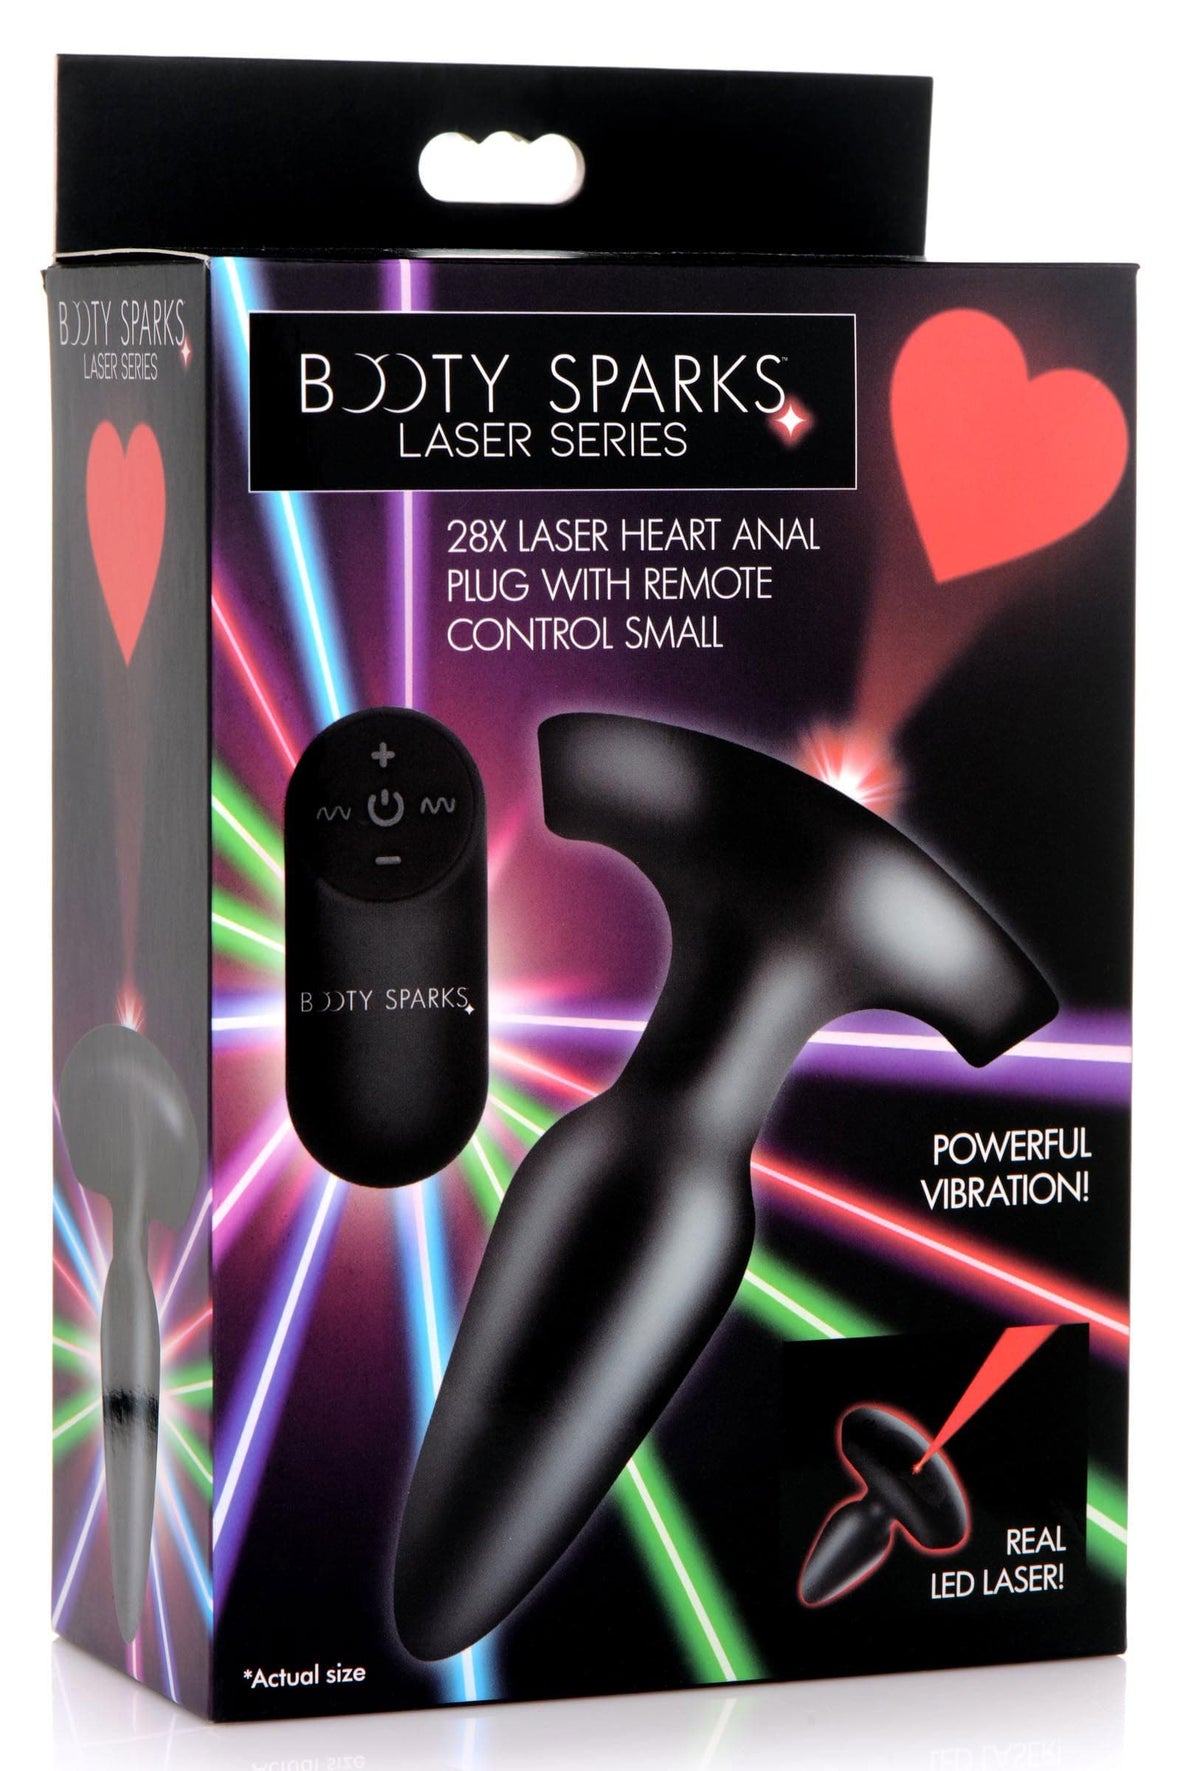 laser heart anal plug with remote control small